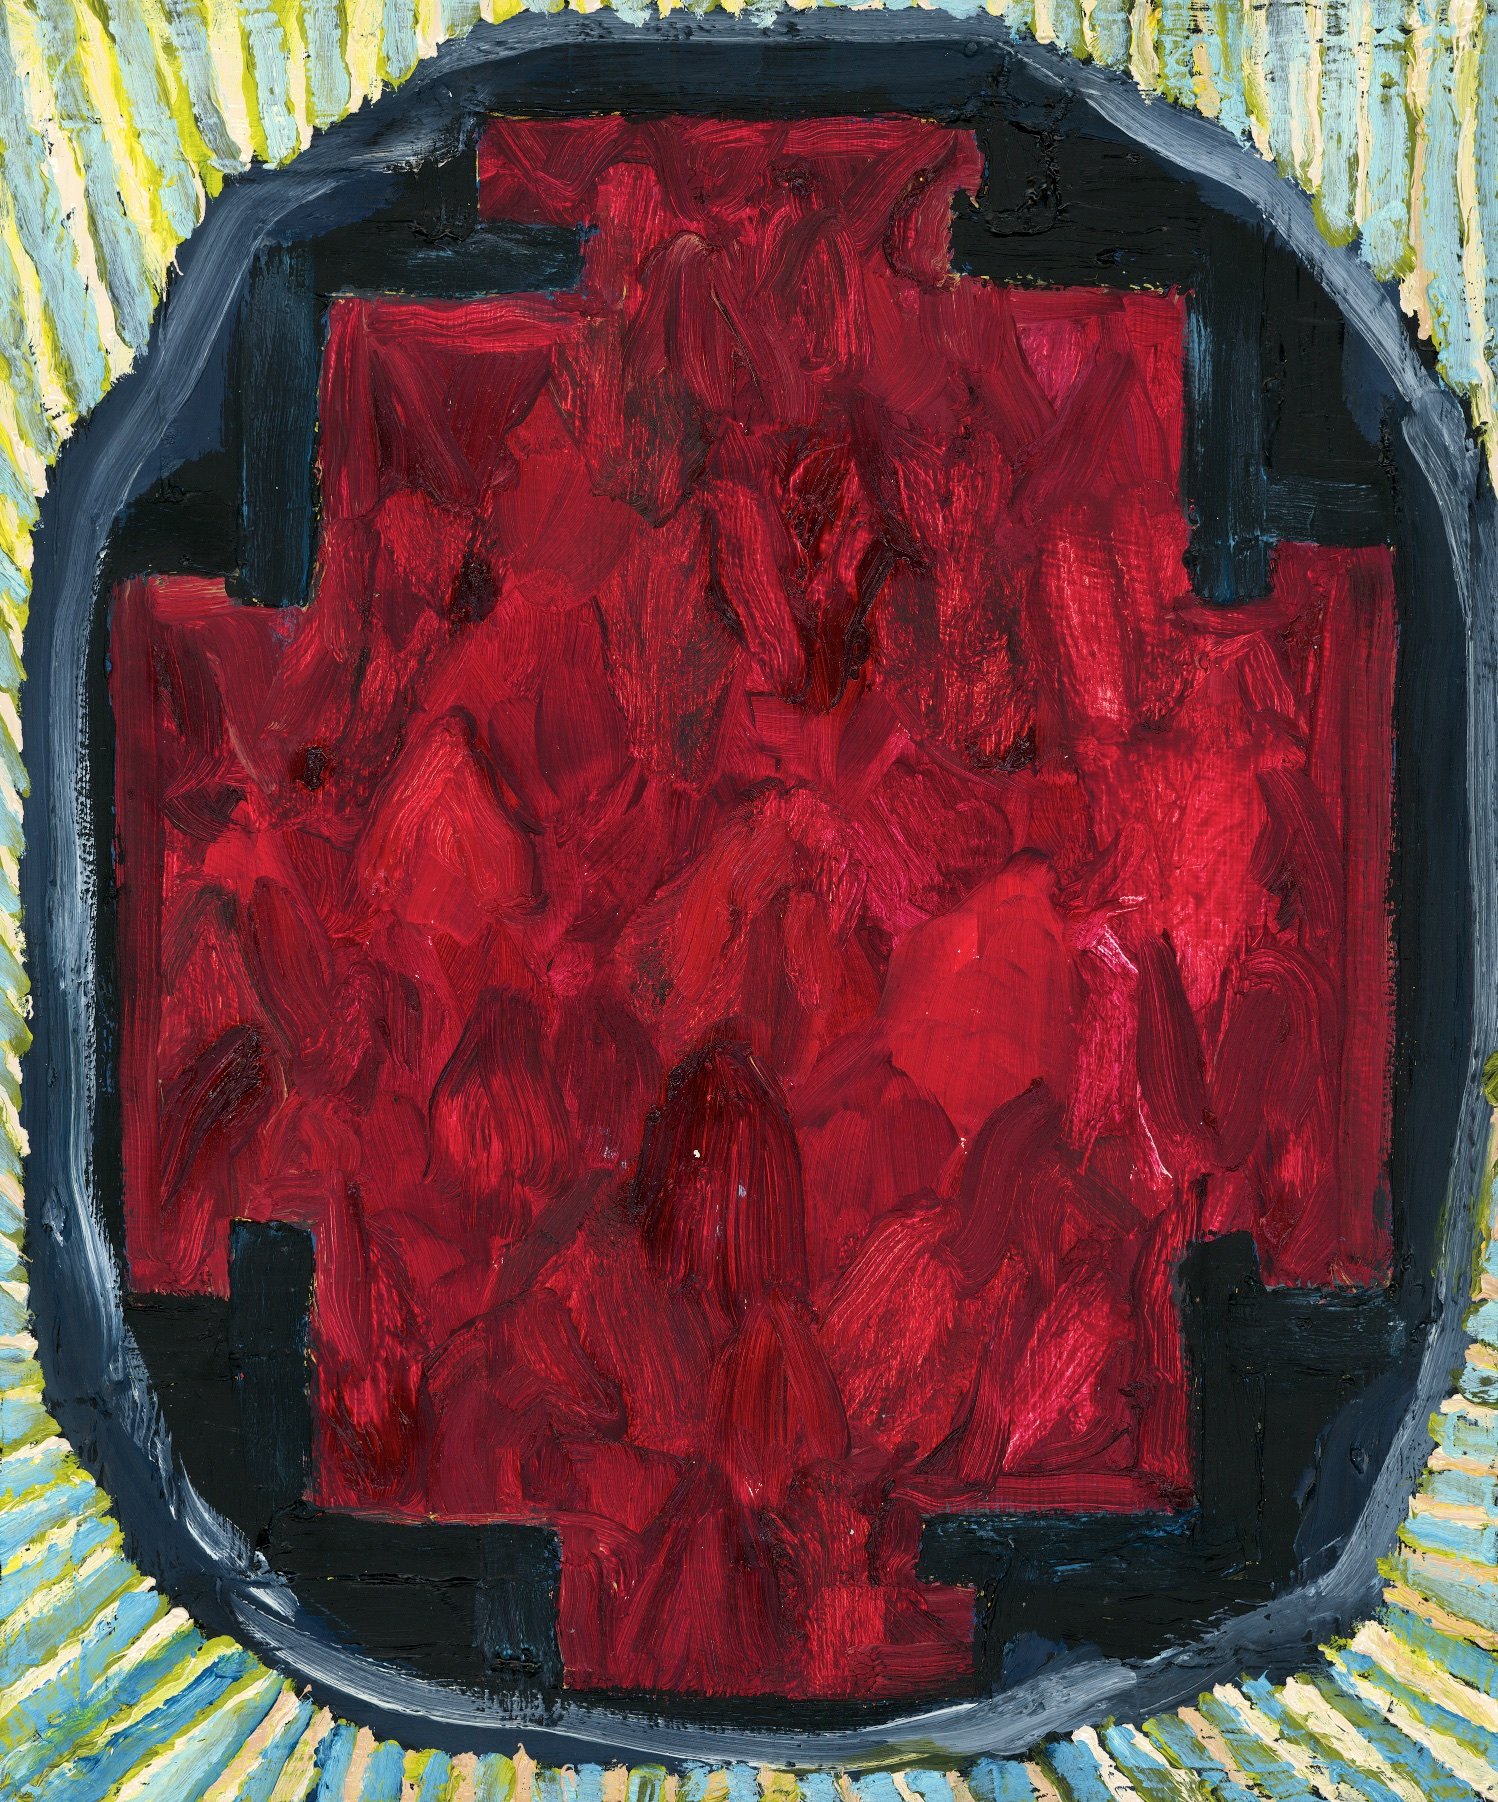   Untitled , 2002-03. Oil on panel. 12 x 10 in. Collection Art Institute of Chicago 